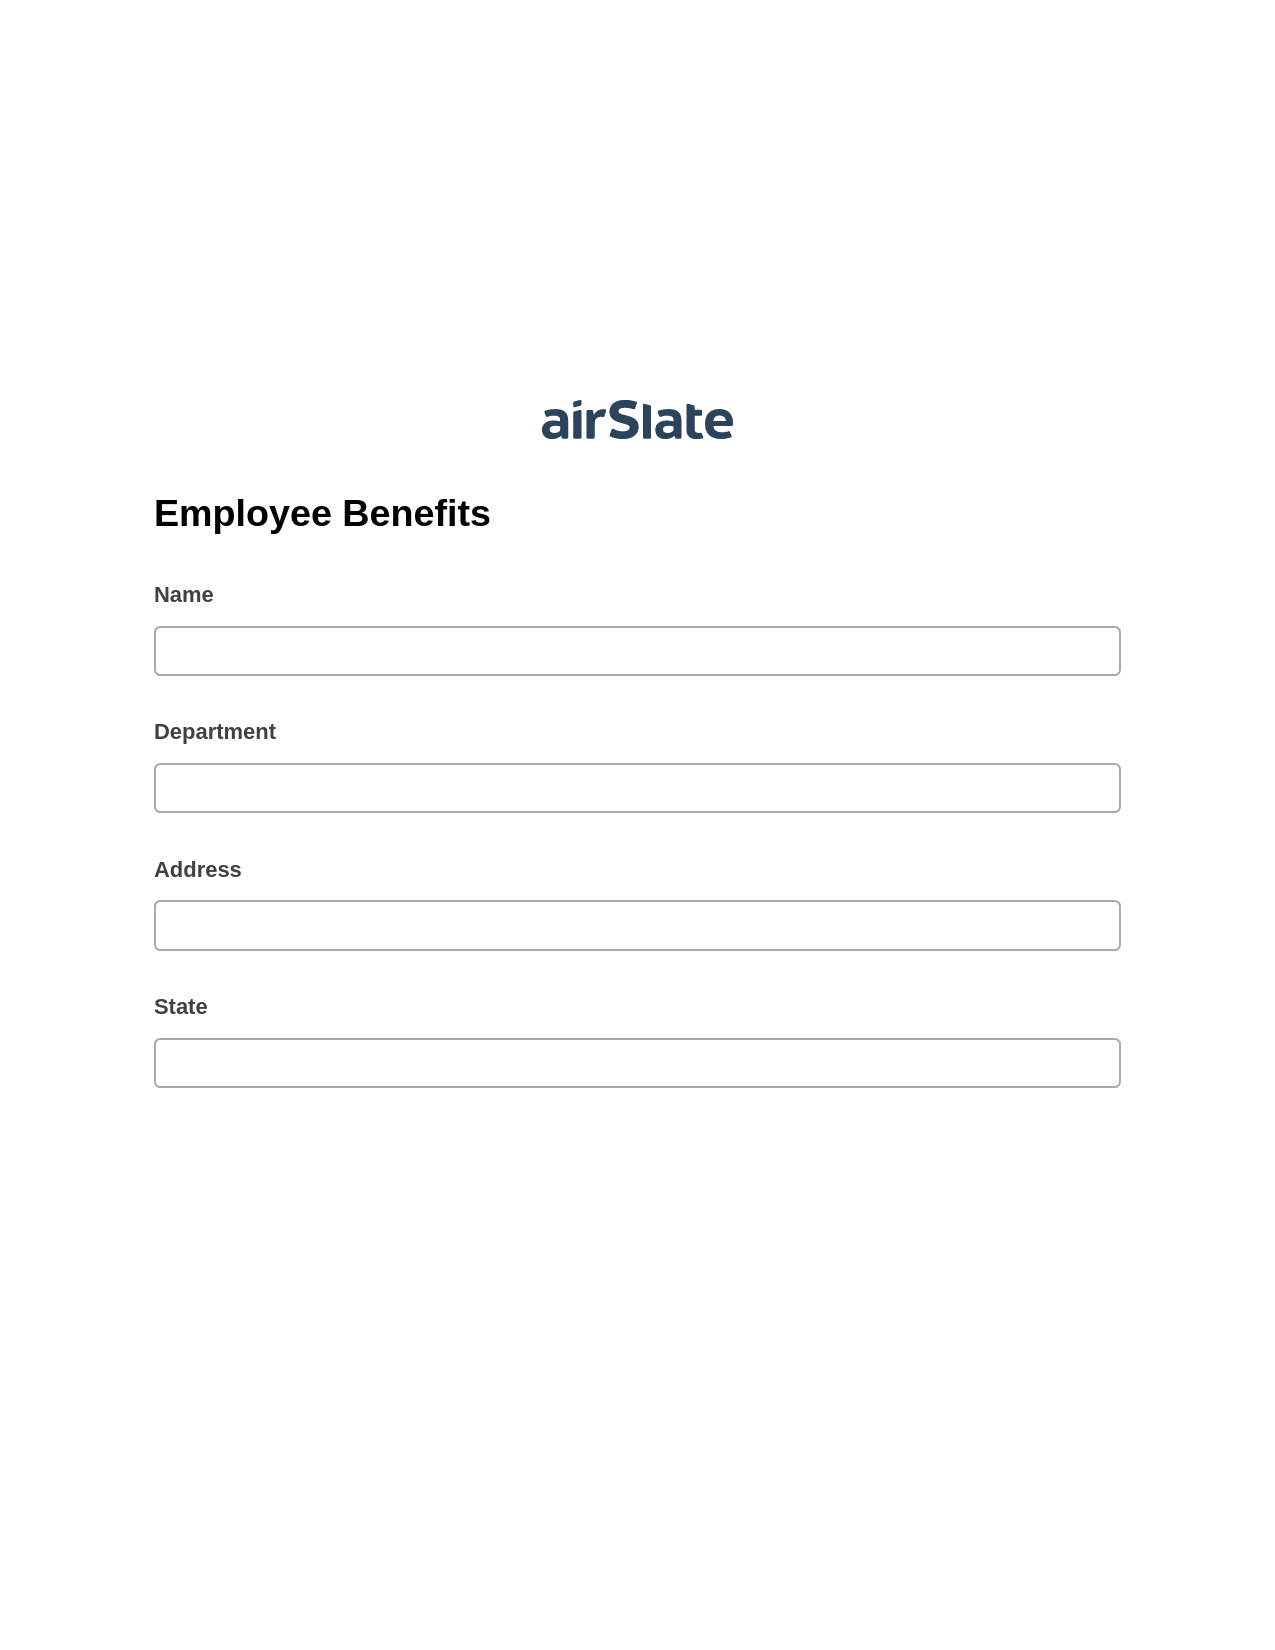 Employee Benefits Pre-fill from Salesforce Record Bot, Mailchimp add recipient to audience Bot, Post-finish Document Bot